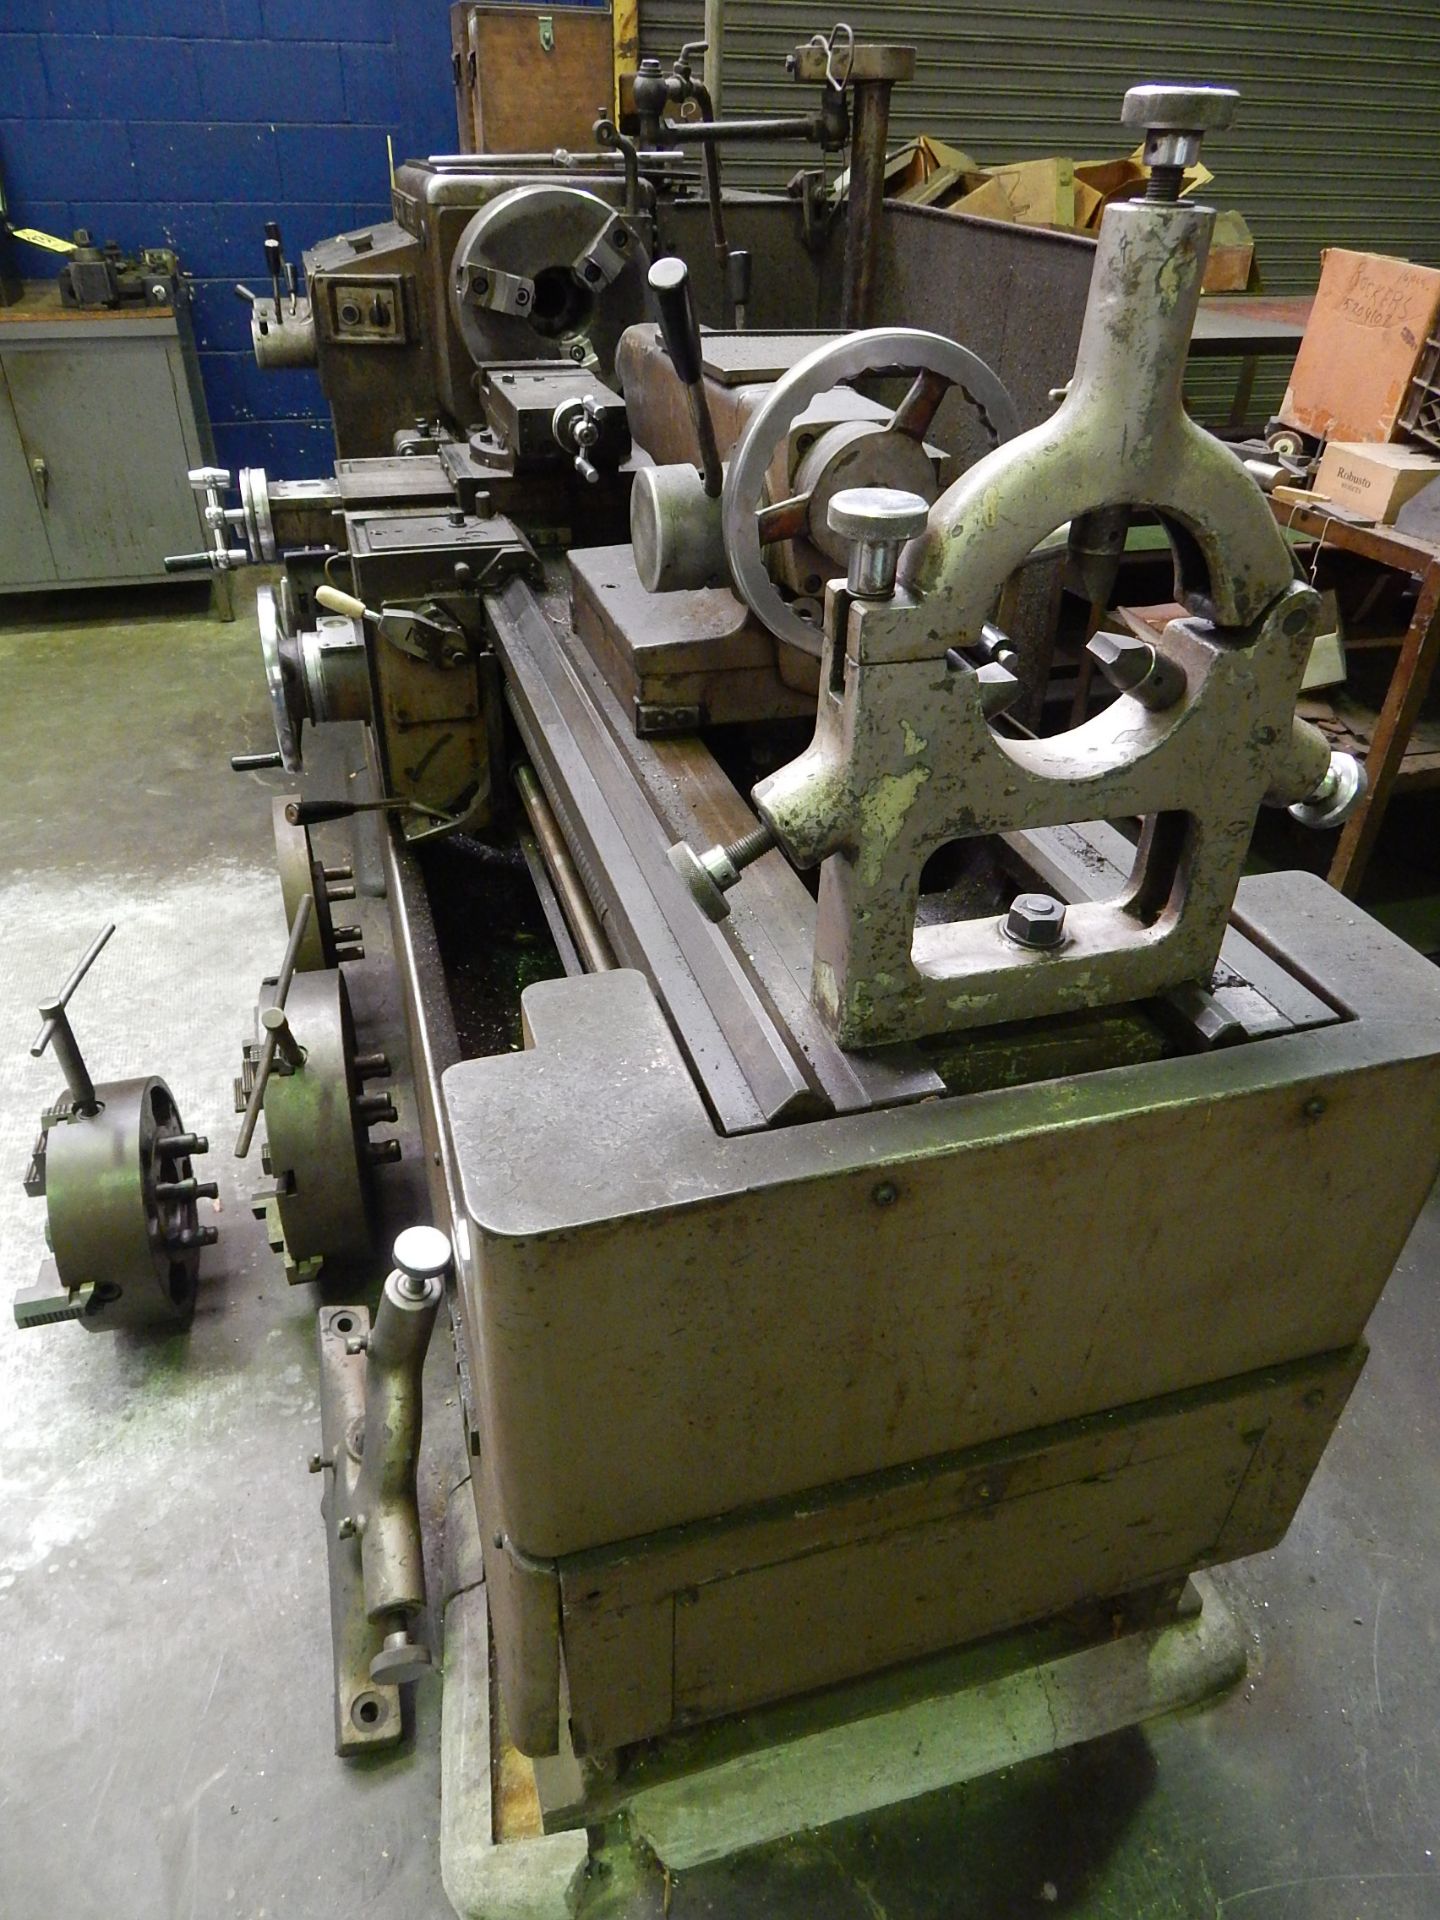 Ikegai Model A20 Engine Lathe, s/n 9534T, 20 In. X 60 In. Capacity, Inch/Metric,12 Inch 3-Jaw Chuck, - Image 5 of 9